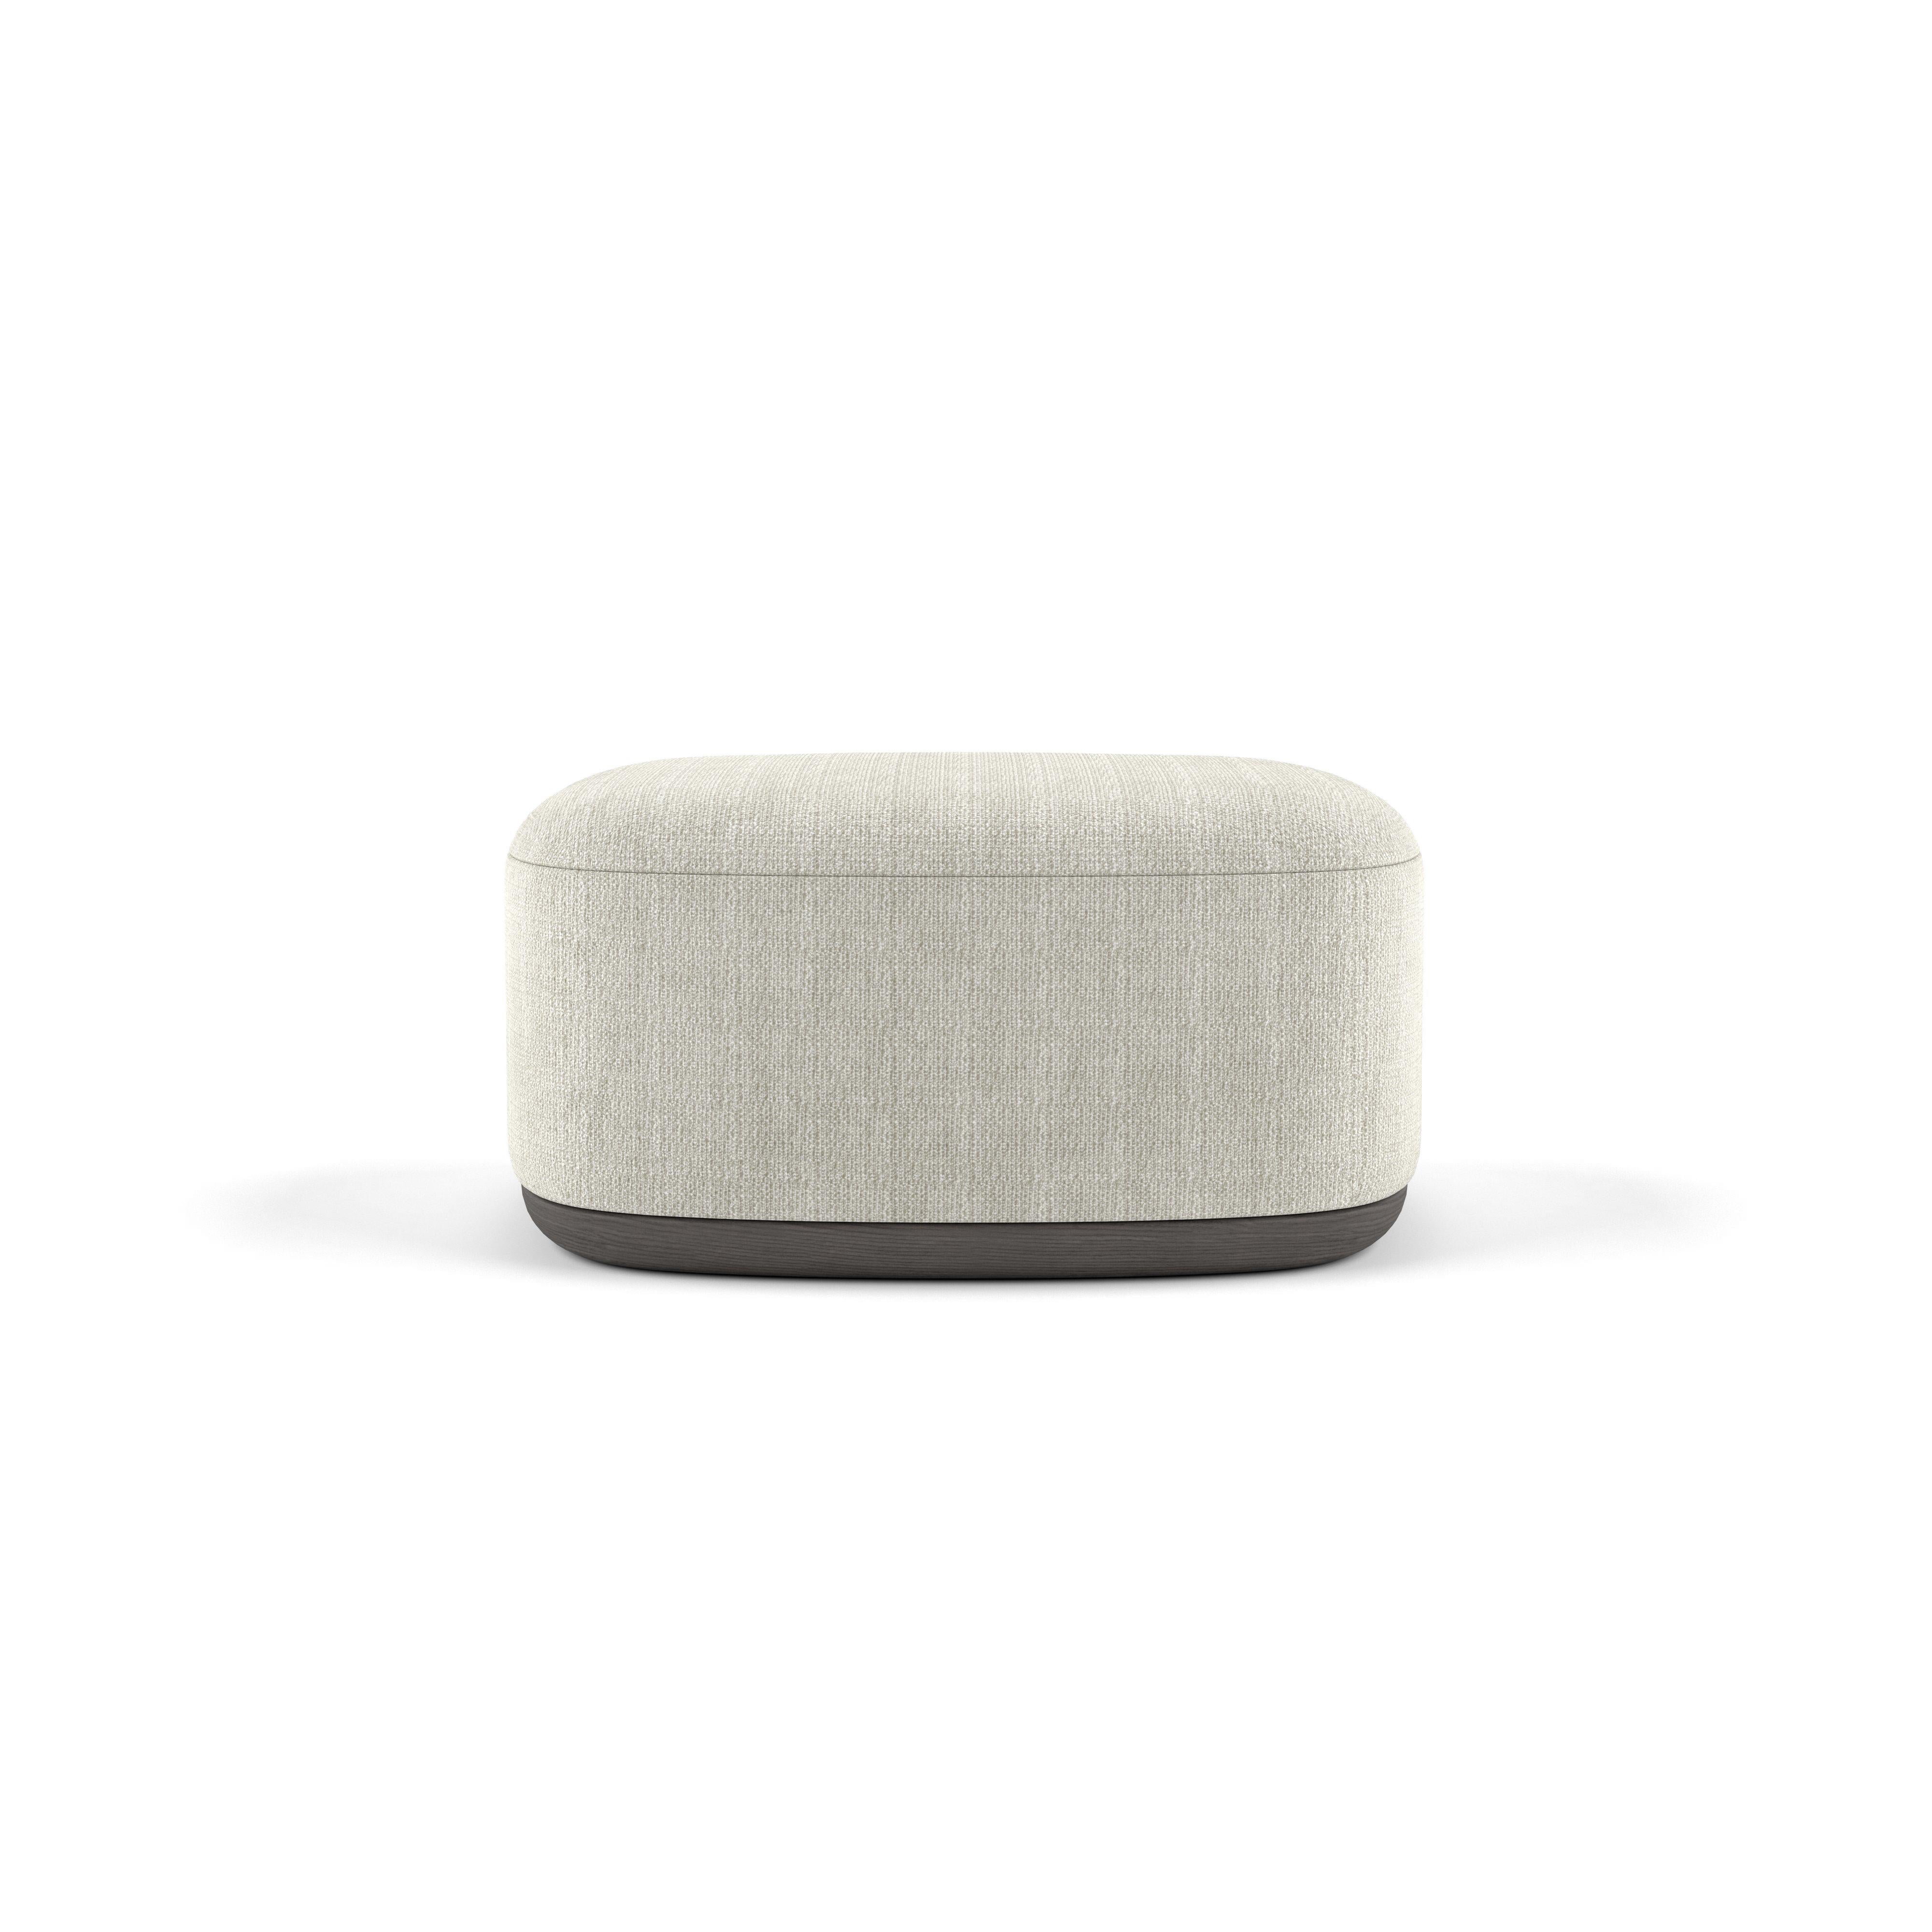 Unio Ottoman by Poiat 
Designers: Timo Mikkonen & Antti Rouhunkoski 

Collection UNIO 2023

Dimensions: H. 40 x W. 75 D. 72 cm SH. 40 
Model shown: Chivasso Yang 95 Fabric

The Unio Collection, featuring an armchair, ottomans, sofas, marks a new